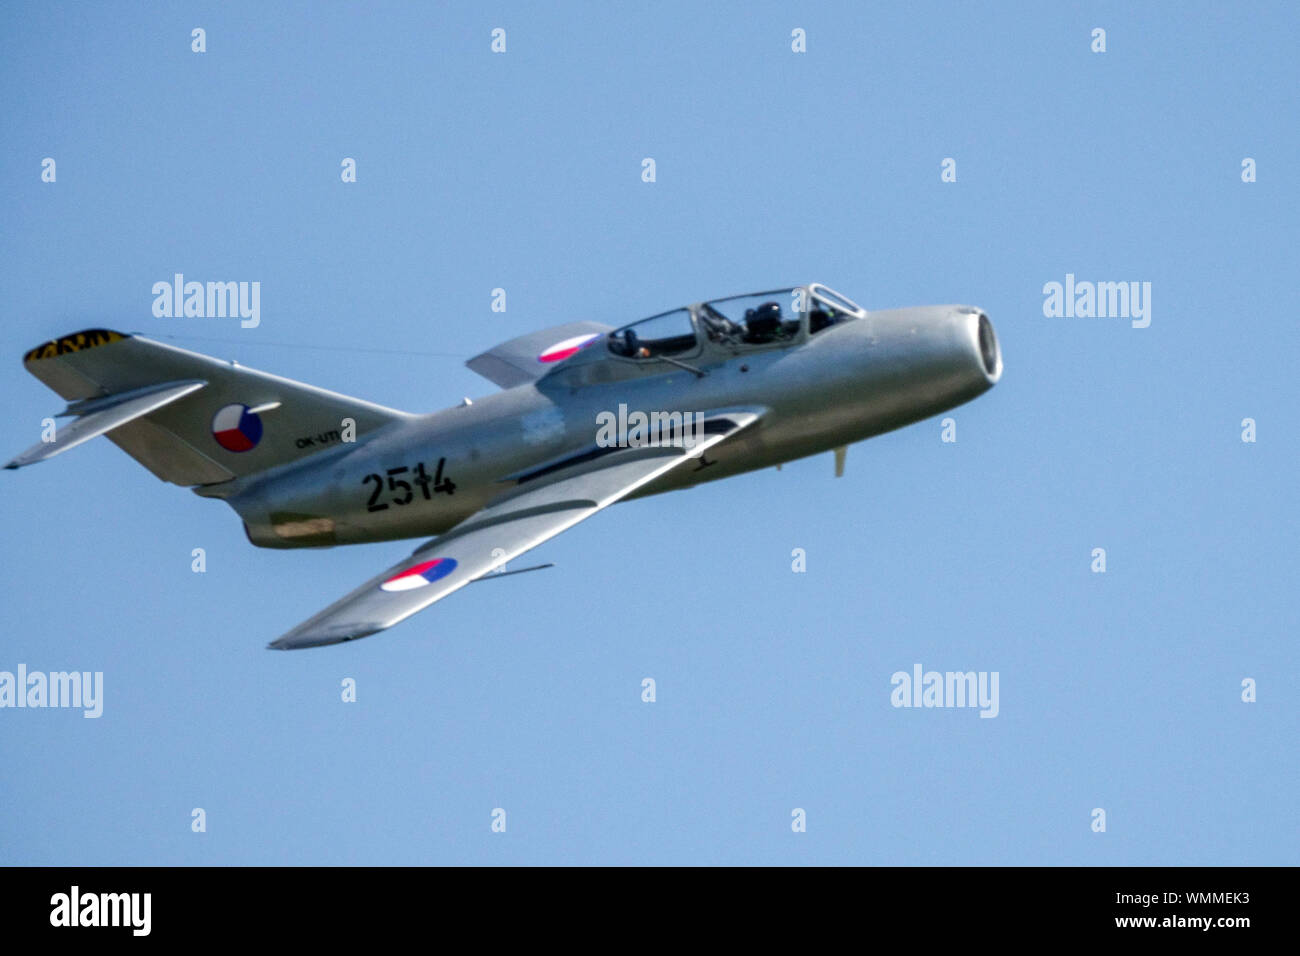 Mig 15 jet fighter in colors of Czechoslovak Air Force, aircraft from the 1950s flying on blue sky Stock Photo